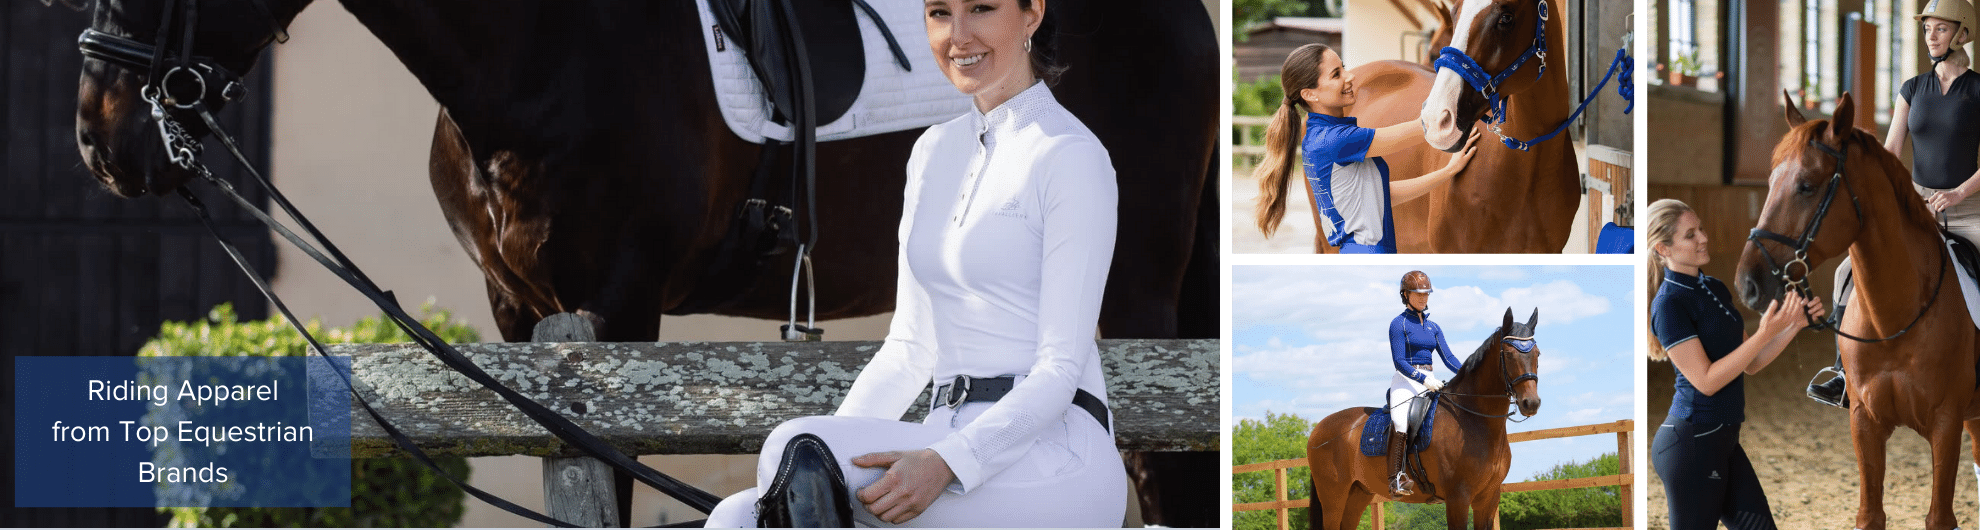 Riding Apparel from Top Equestrian Brands